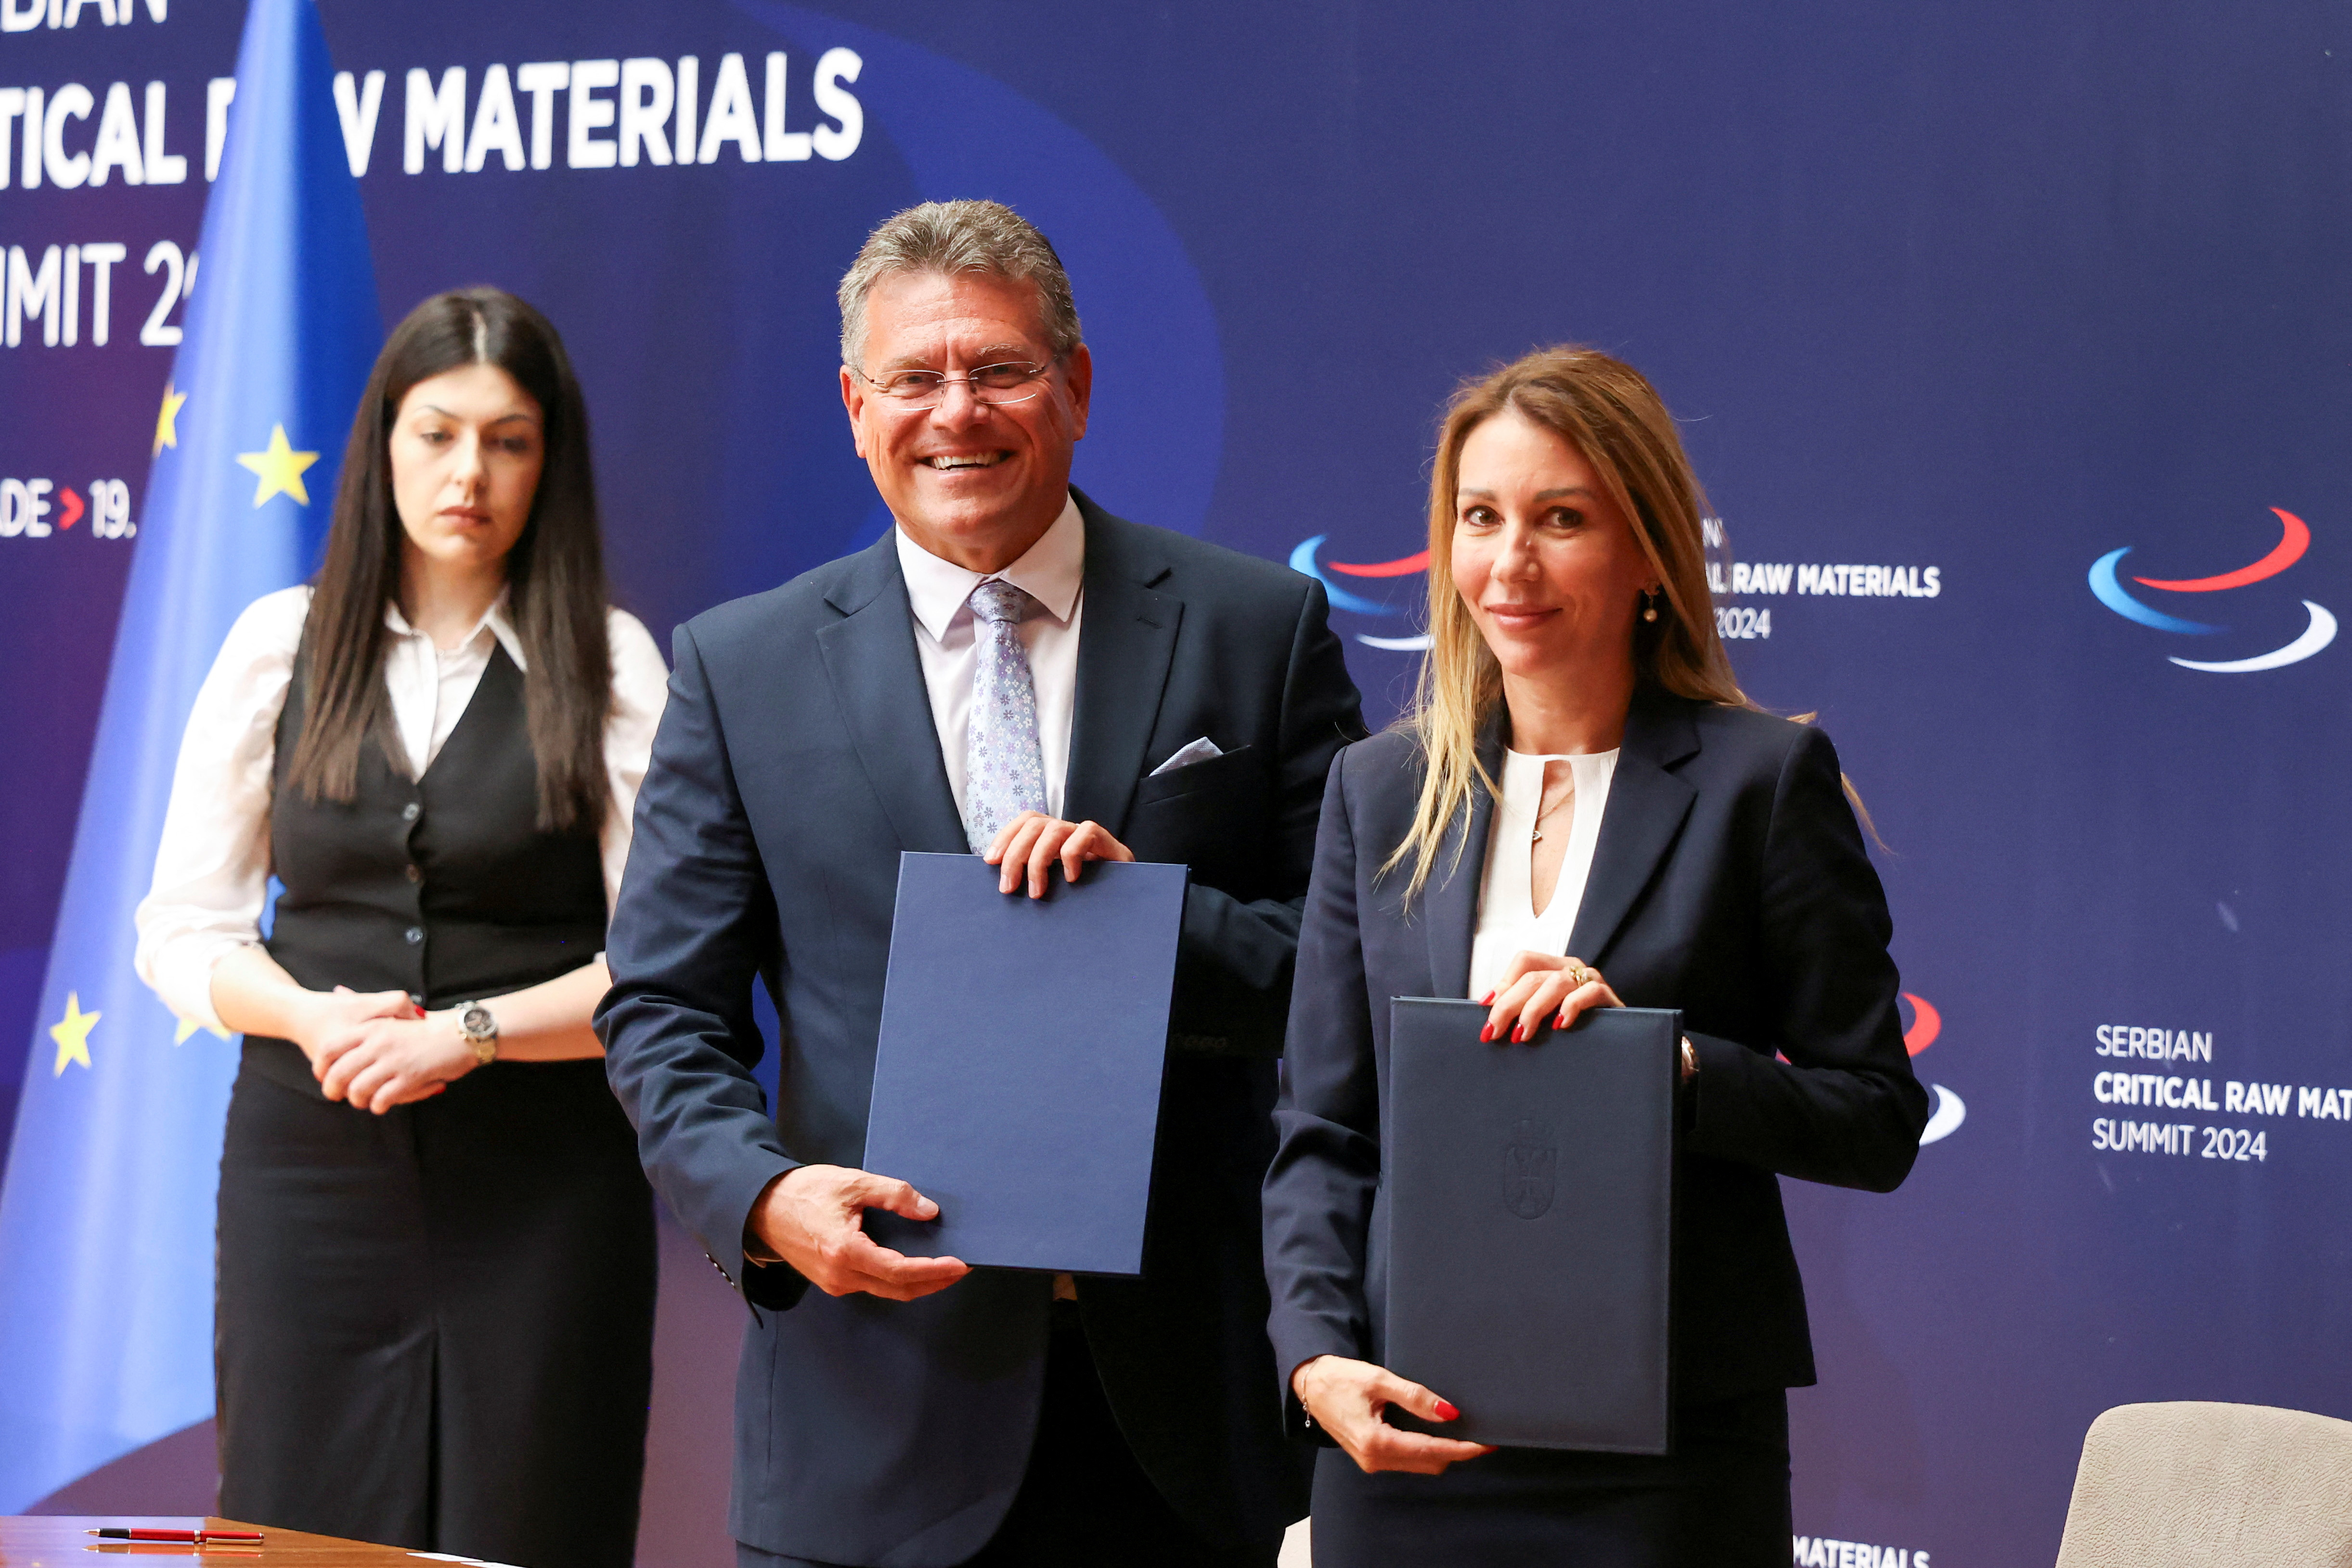 European Commission Vice President Maros Sefcovic and Serbian Minister of Mining and Energy  Dubravka Djedovic hold a signed a memorandum of understanding with the European Union, in Belgrade